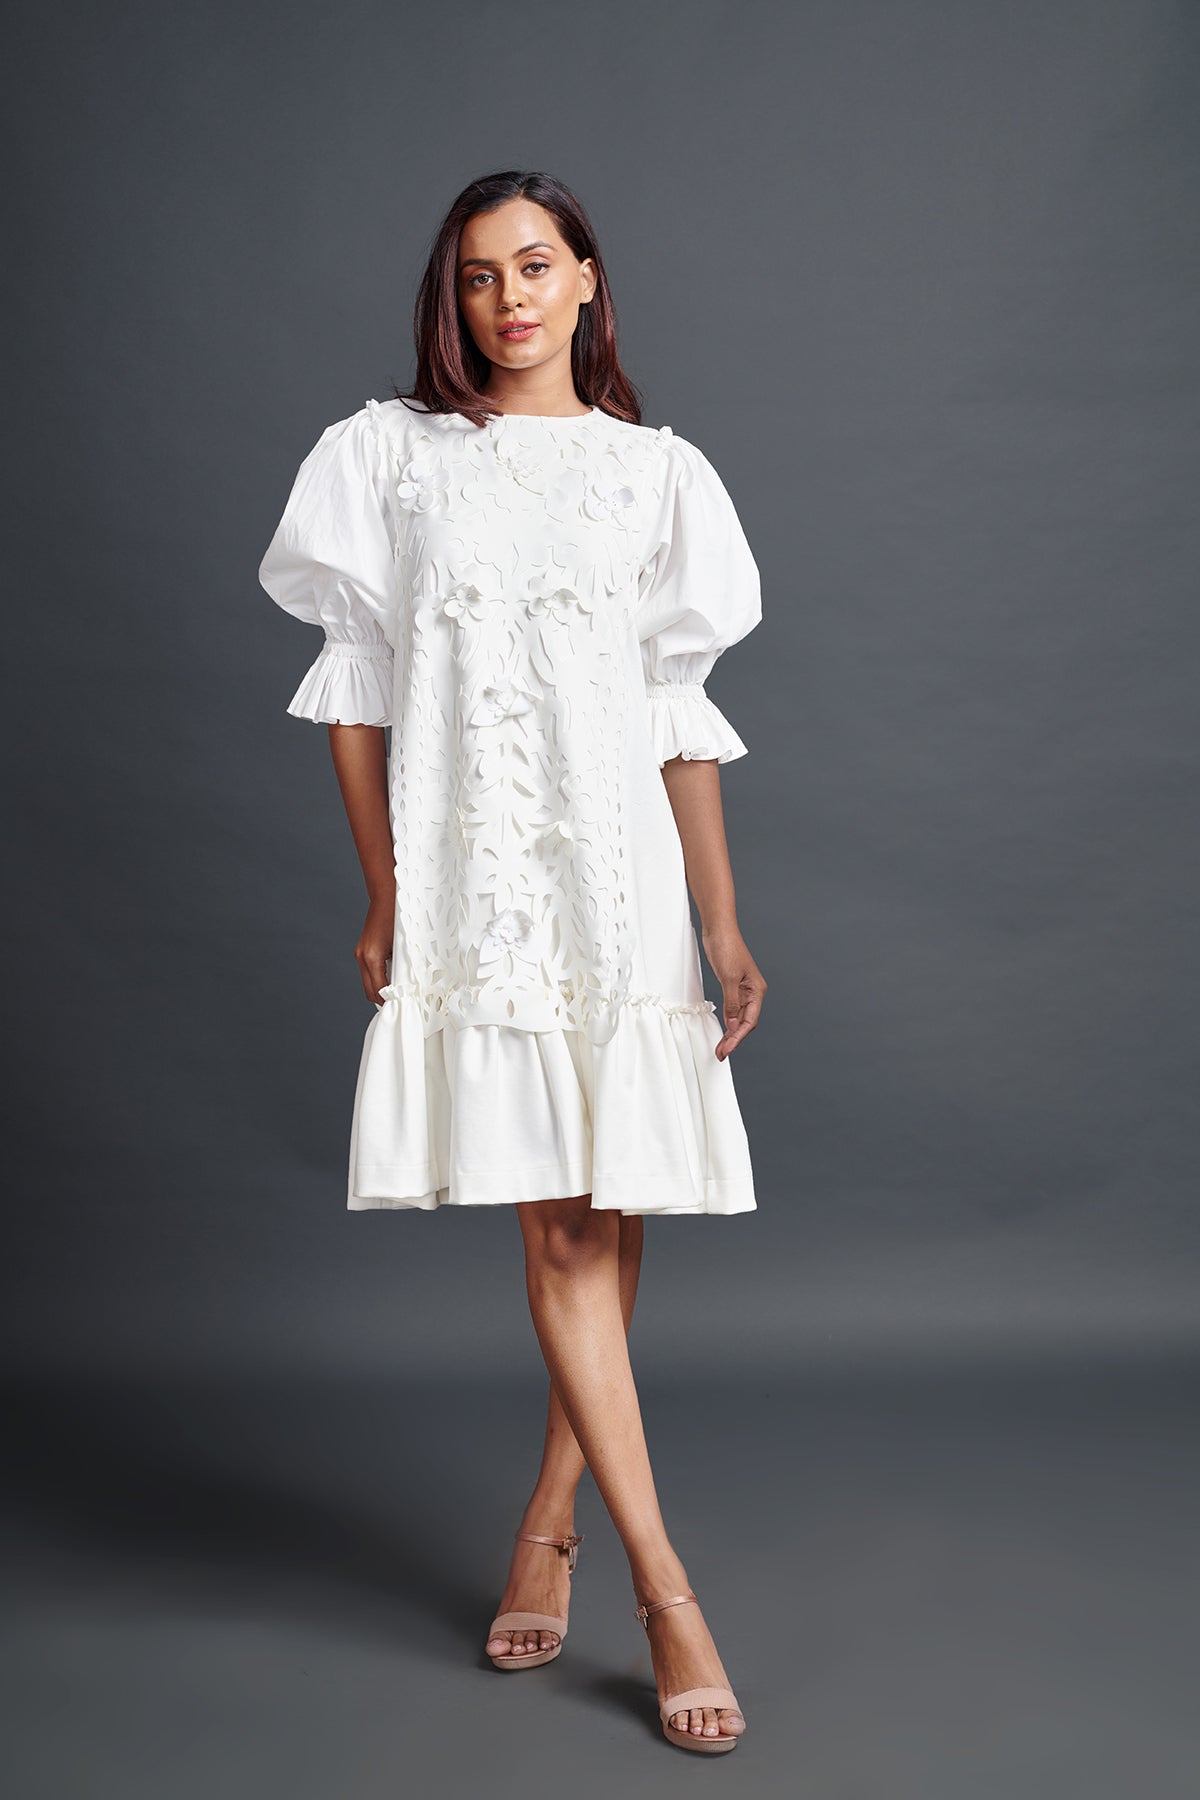 Image of WHITE HAND EMBEROIDERED CUTWORK PANELED DRESS. From savoirfashions.com